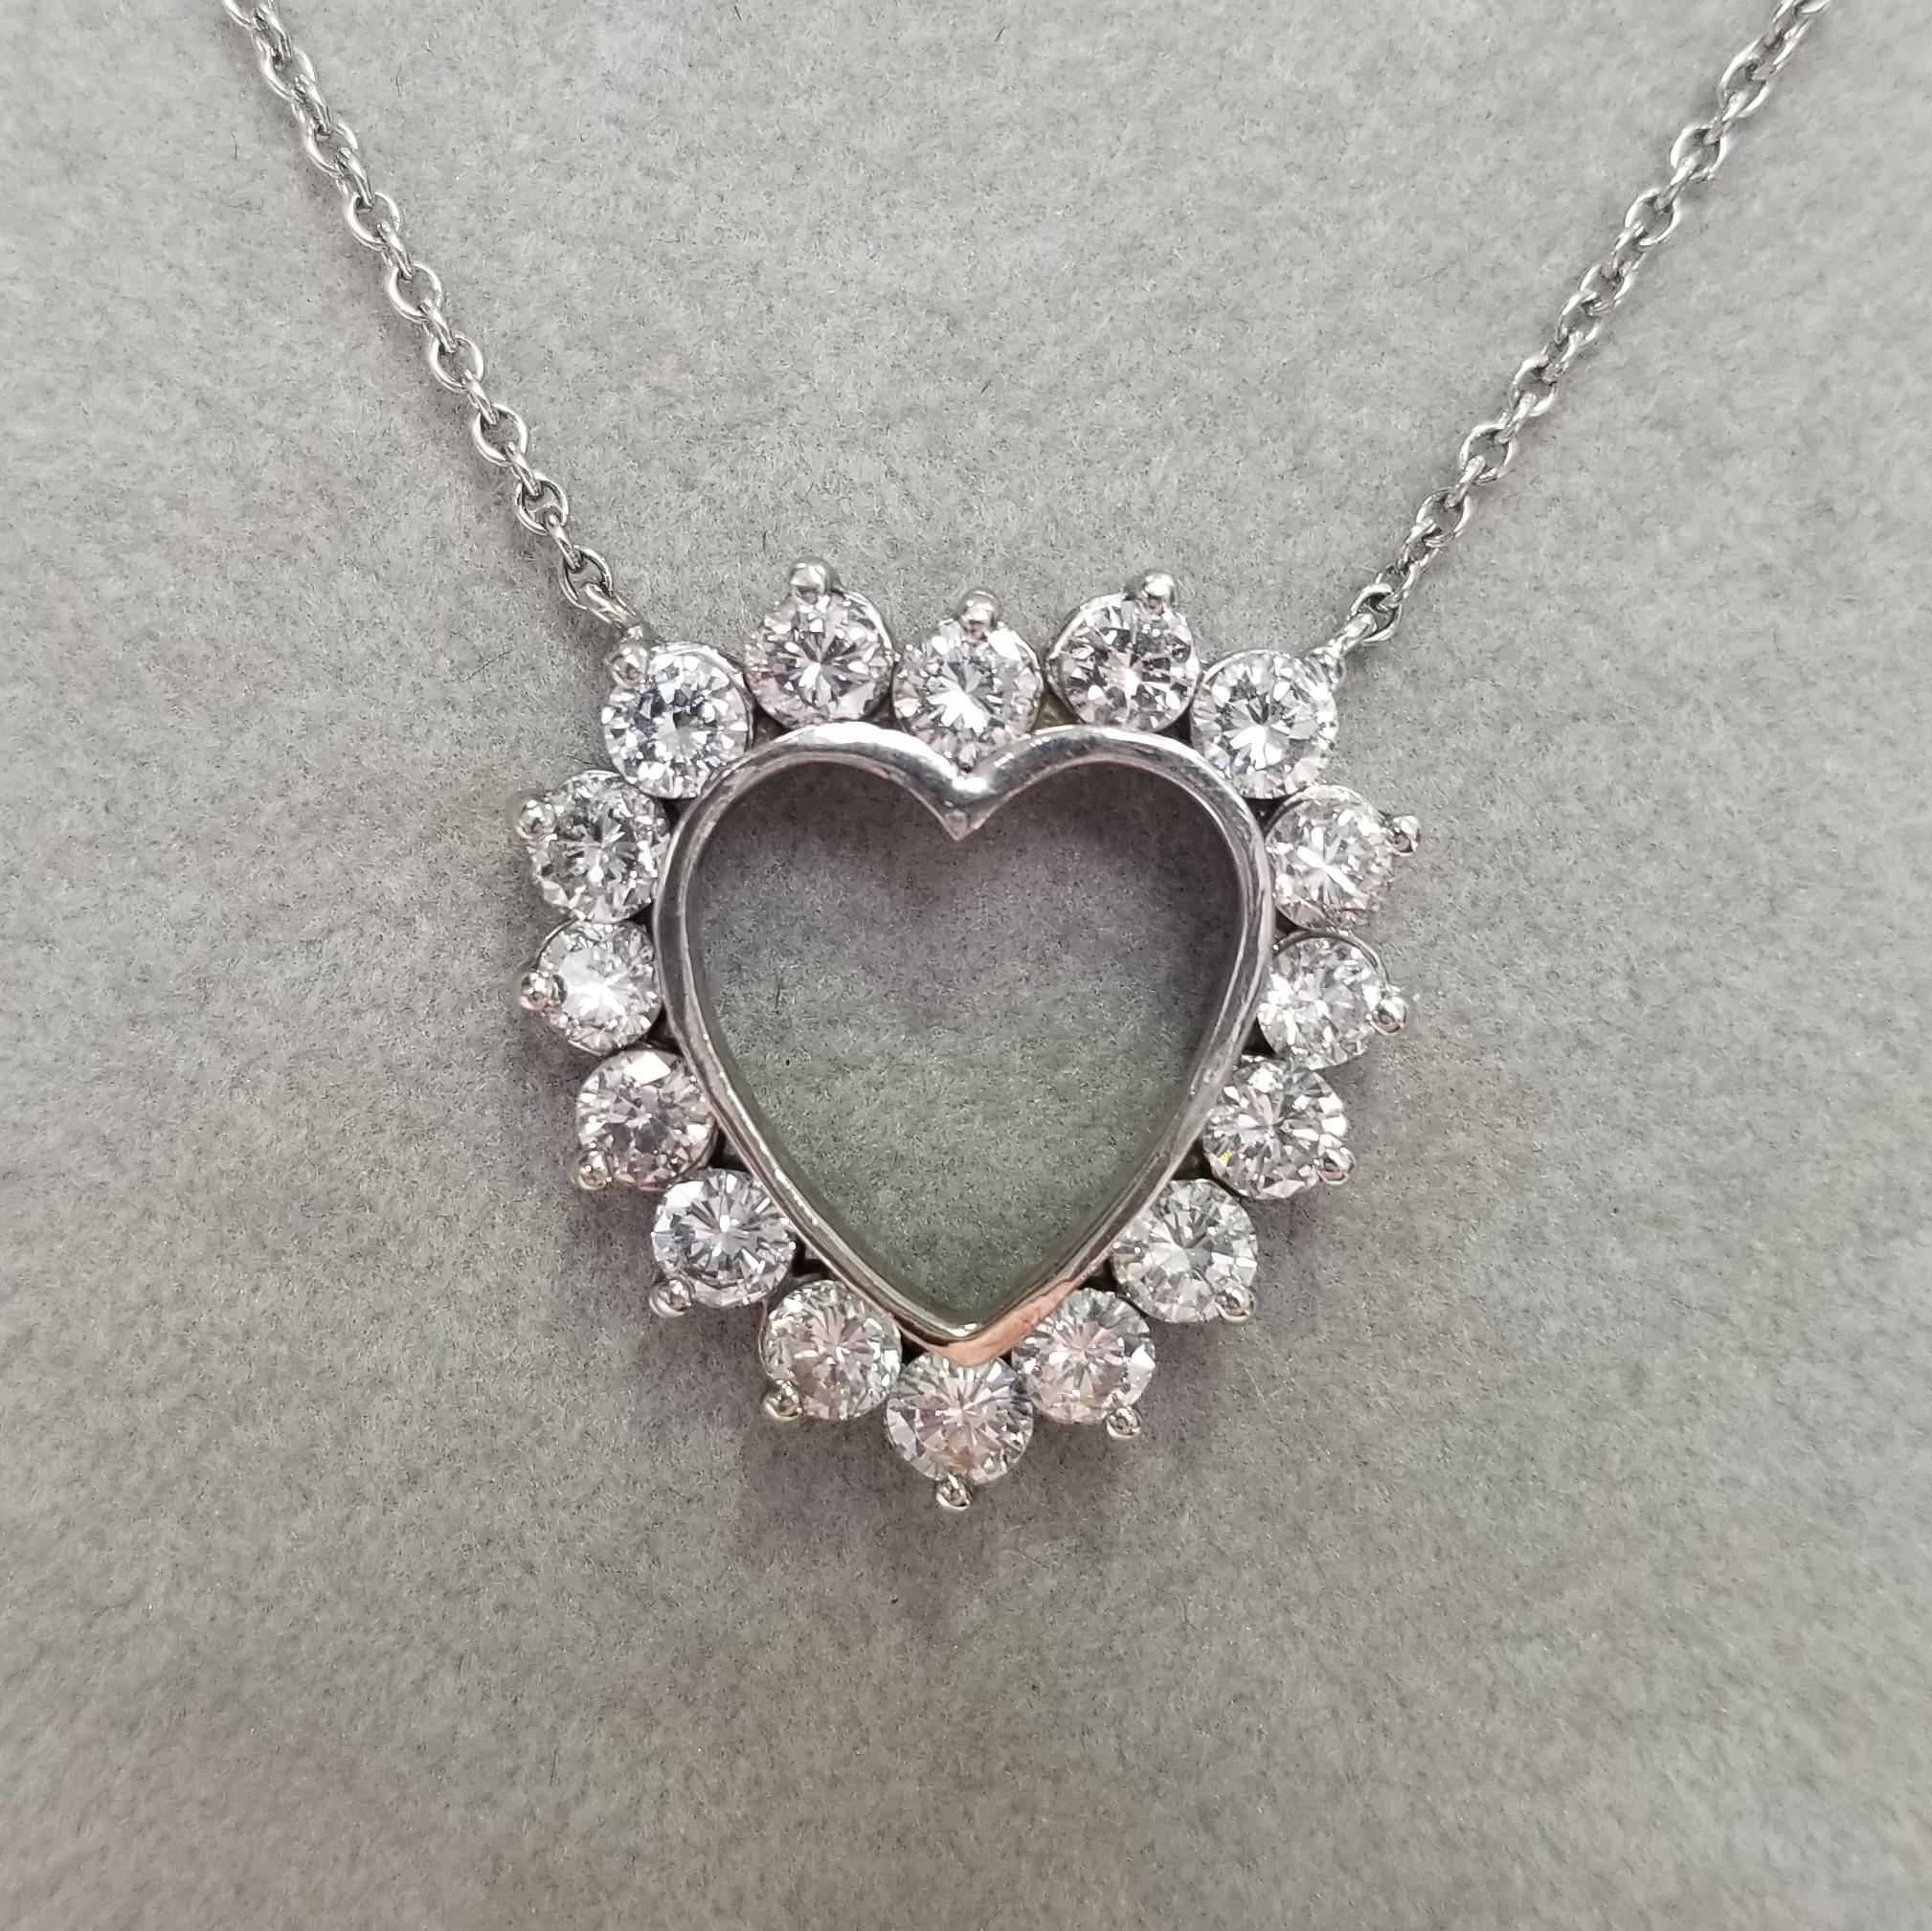 Specifications:      
    STONES:  16  DIAMONDS
    COLOR & CLARITY:     G VS2-SI1
    TOTAL CARAT WEIGHT:   3.25cts.
    metal:14k WHITE GOLD
    CHAIN length:18 inch
    CHAIN & PENDANT weight: 5 gram
    type:CHAIN  & PENDANT